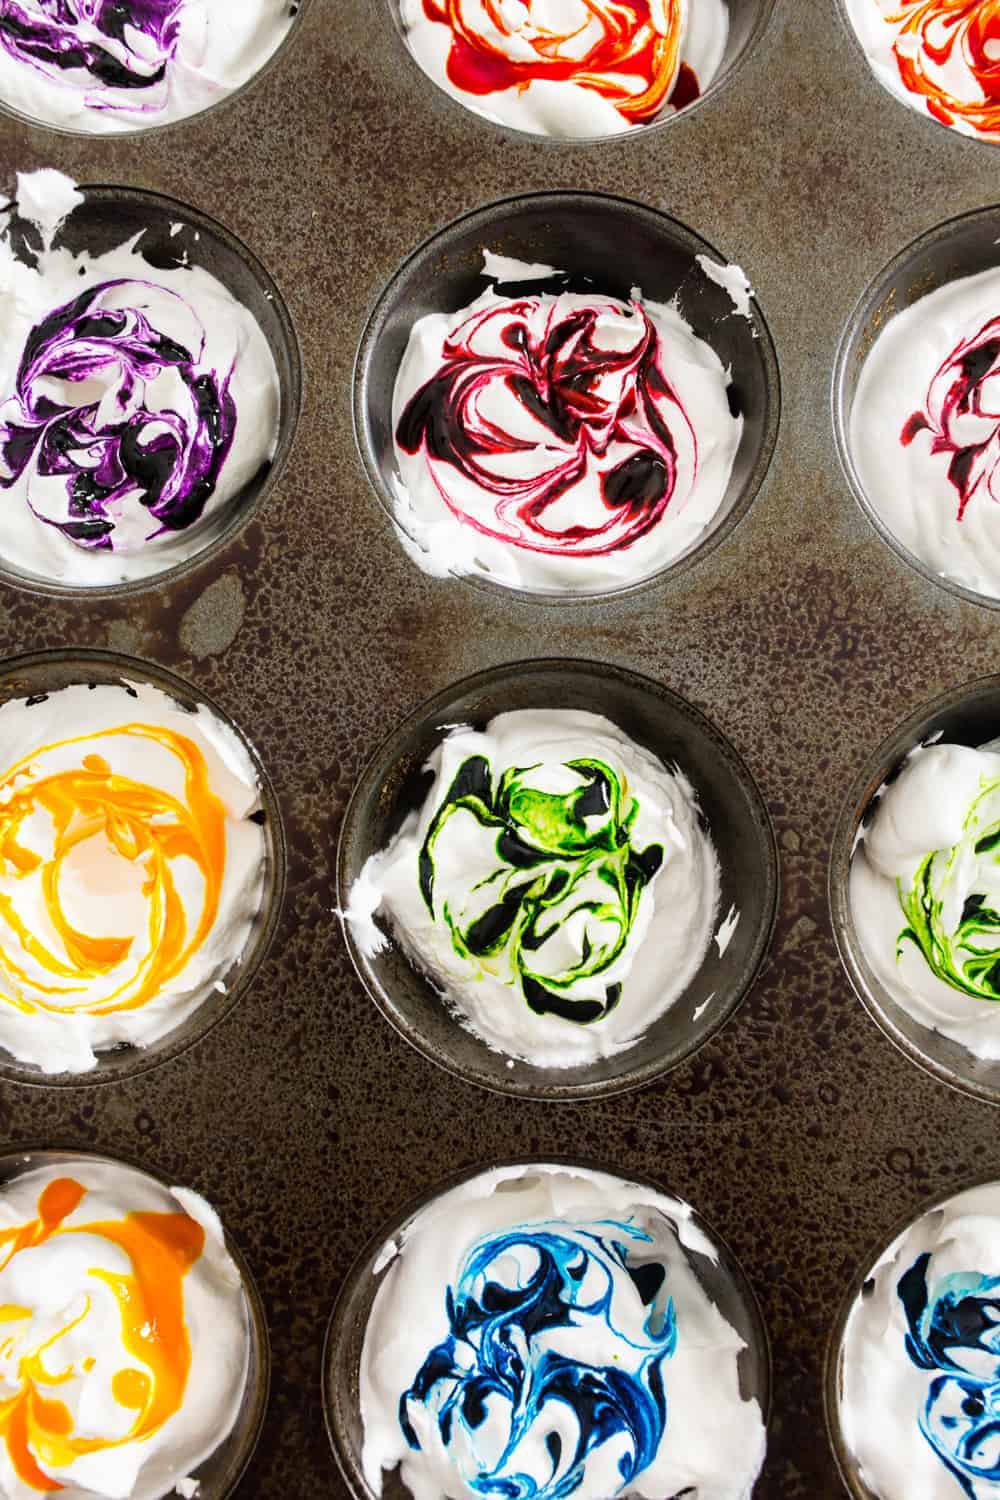 Whipped Cream Dyed Eggs are super simple and so much fun. Use a cupcake pan to keep the colors separated or swirl them together for a beautiful effect!